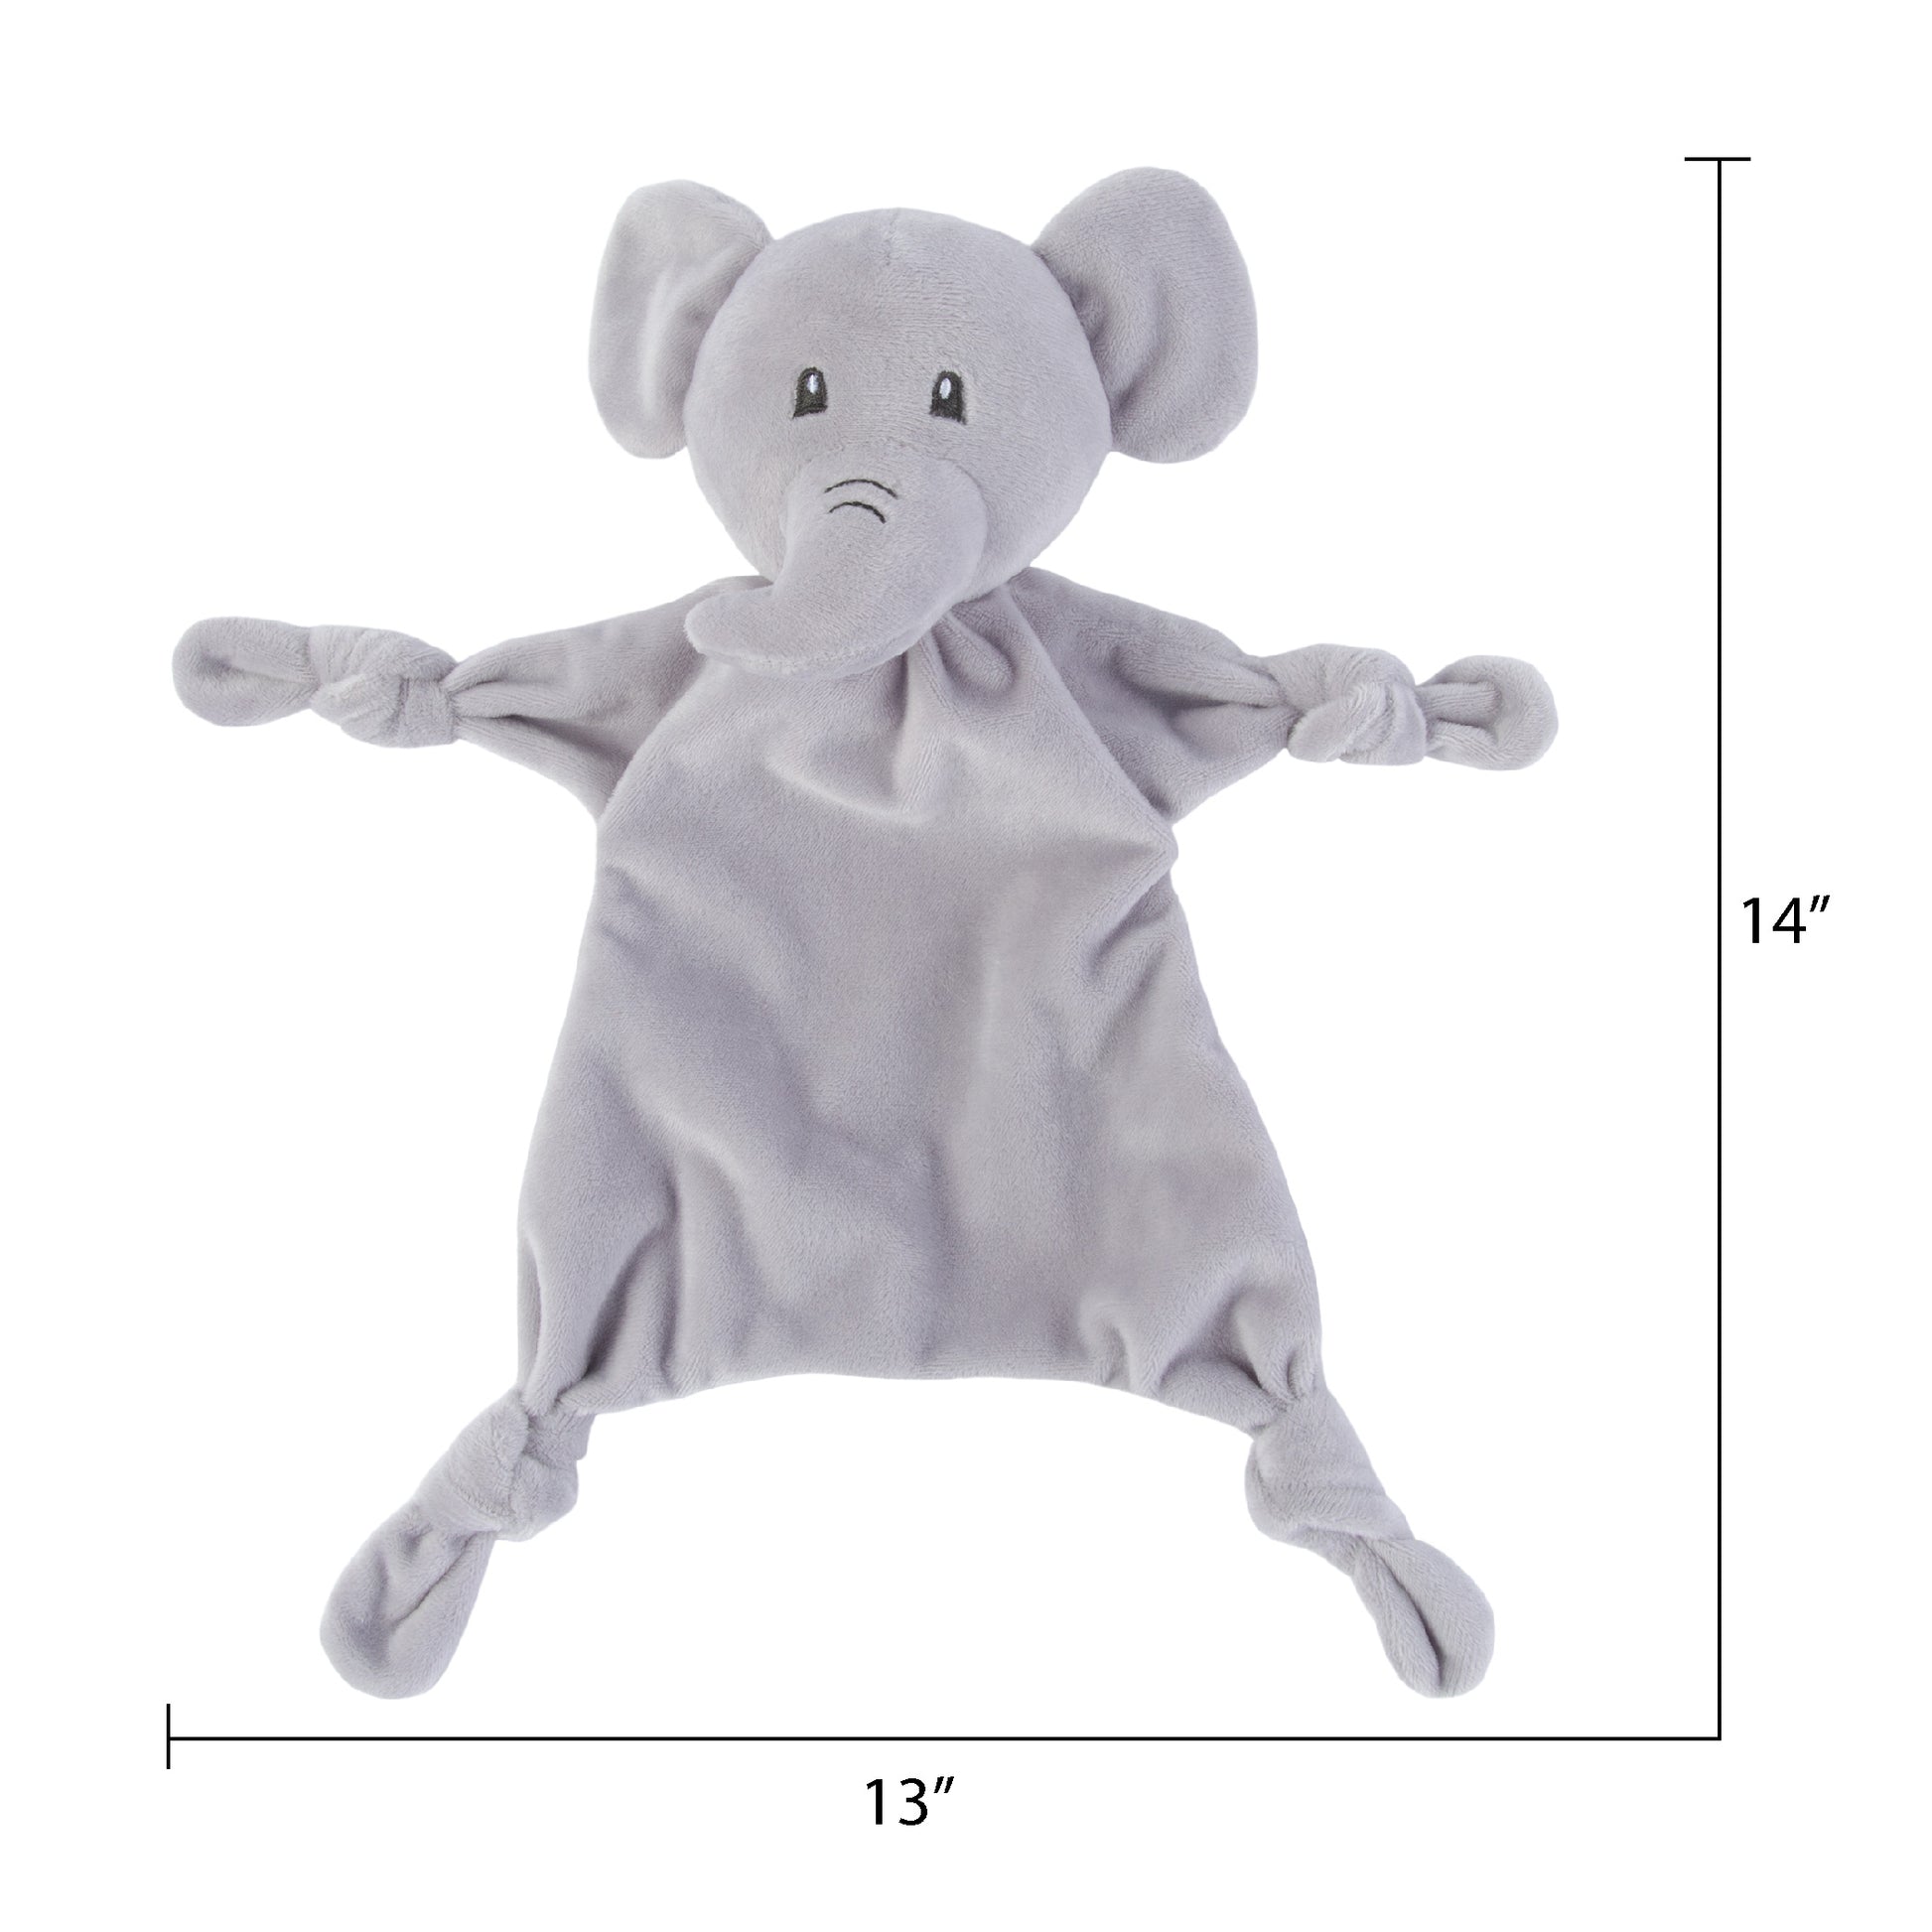  Elephant Security Blanket- dimensions